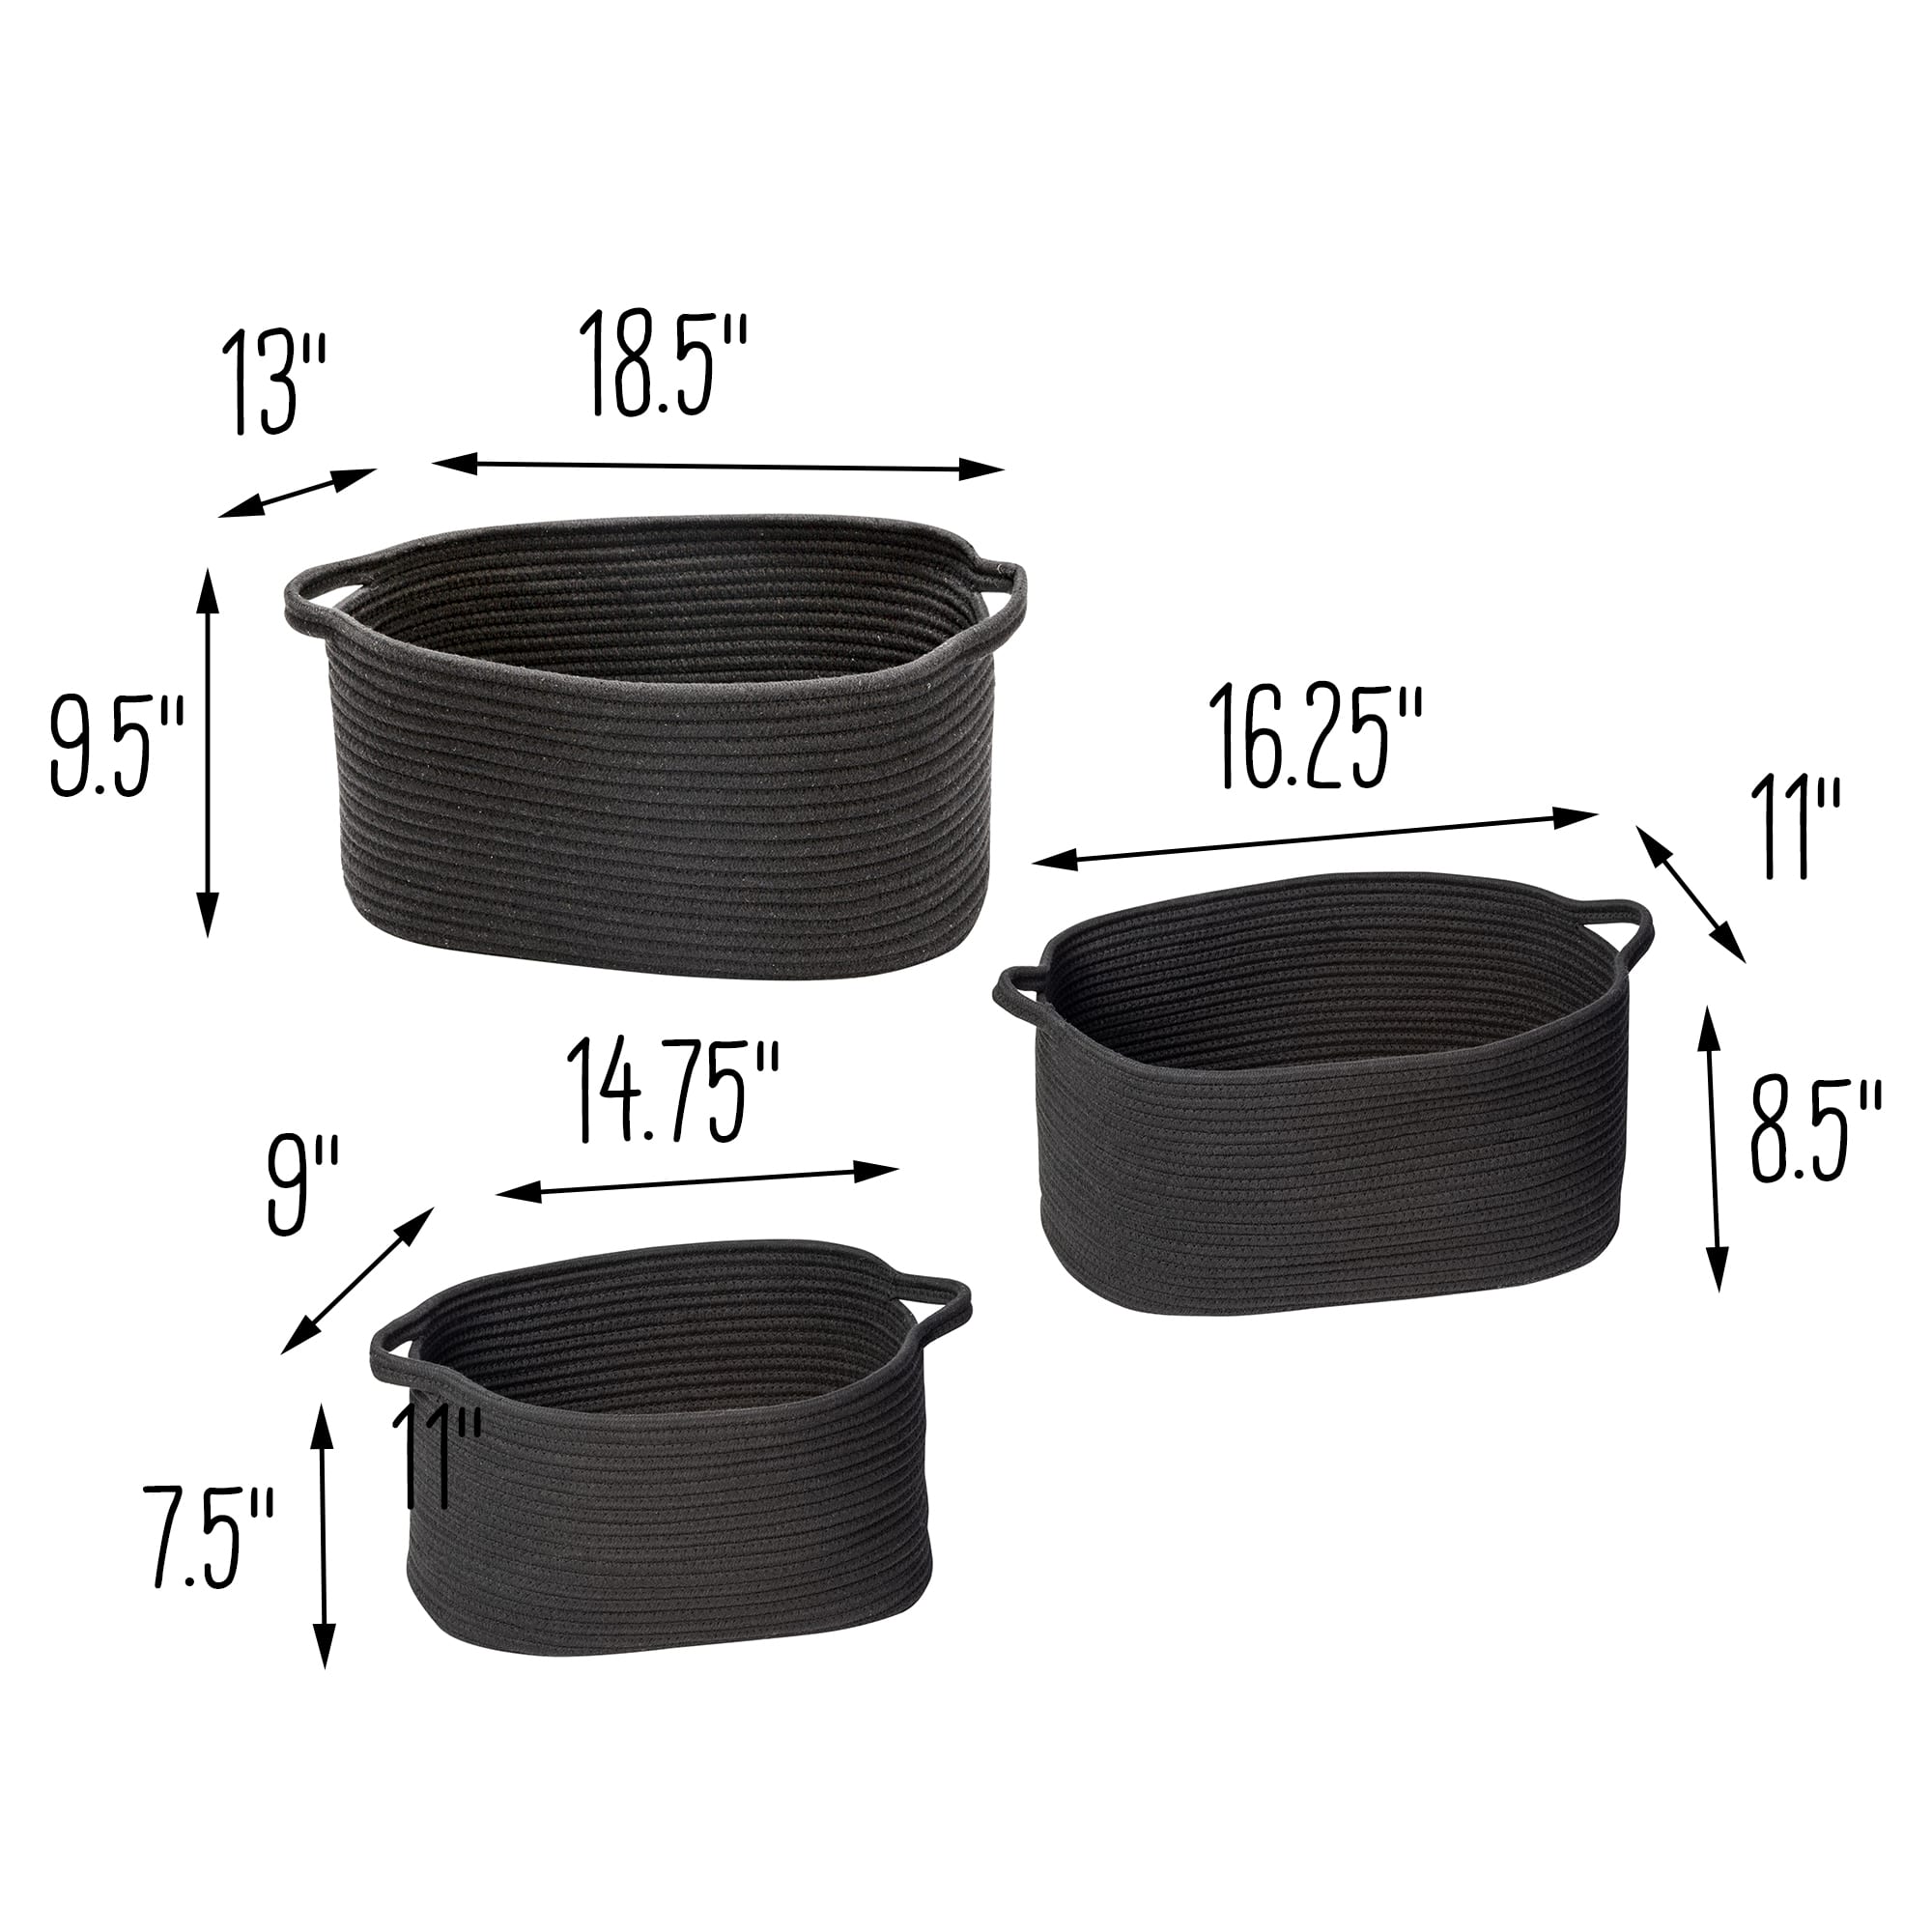 Honey Can Do Black Cotton Coil Baskets, 3ct.